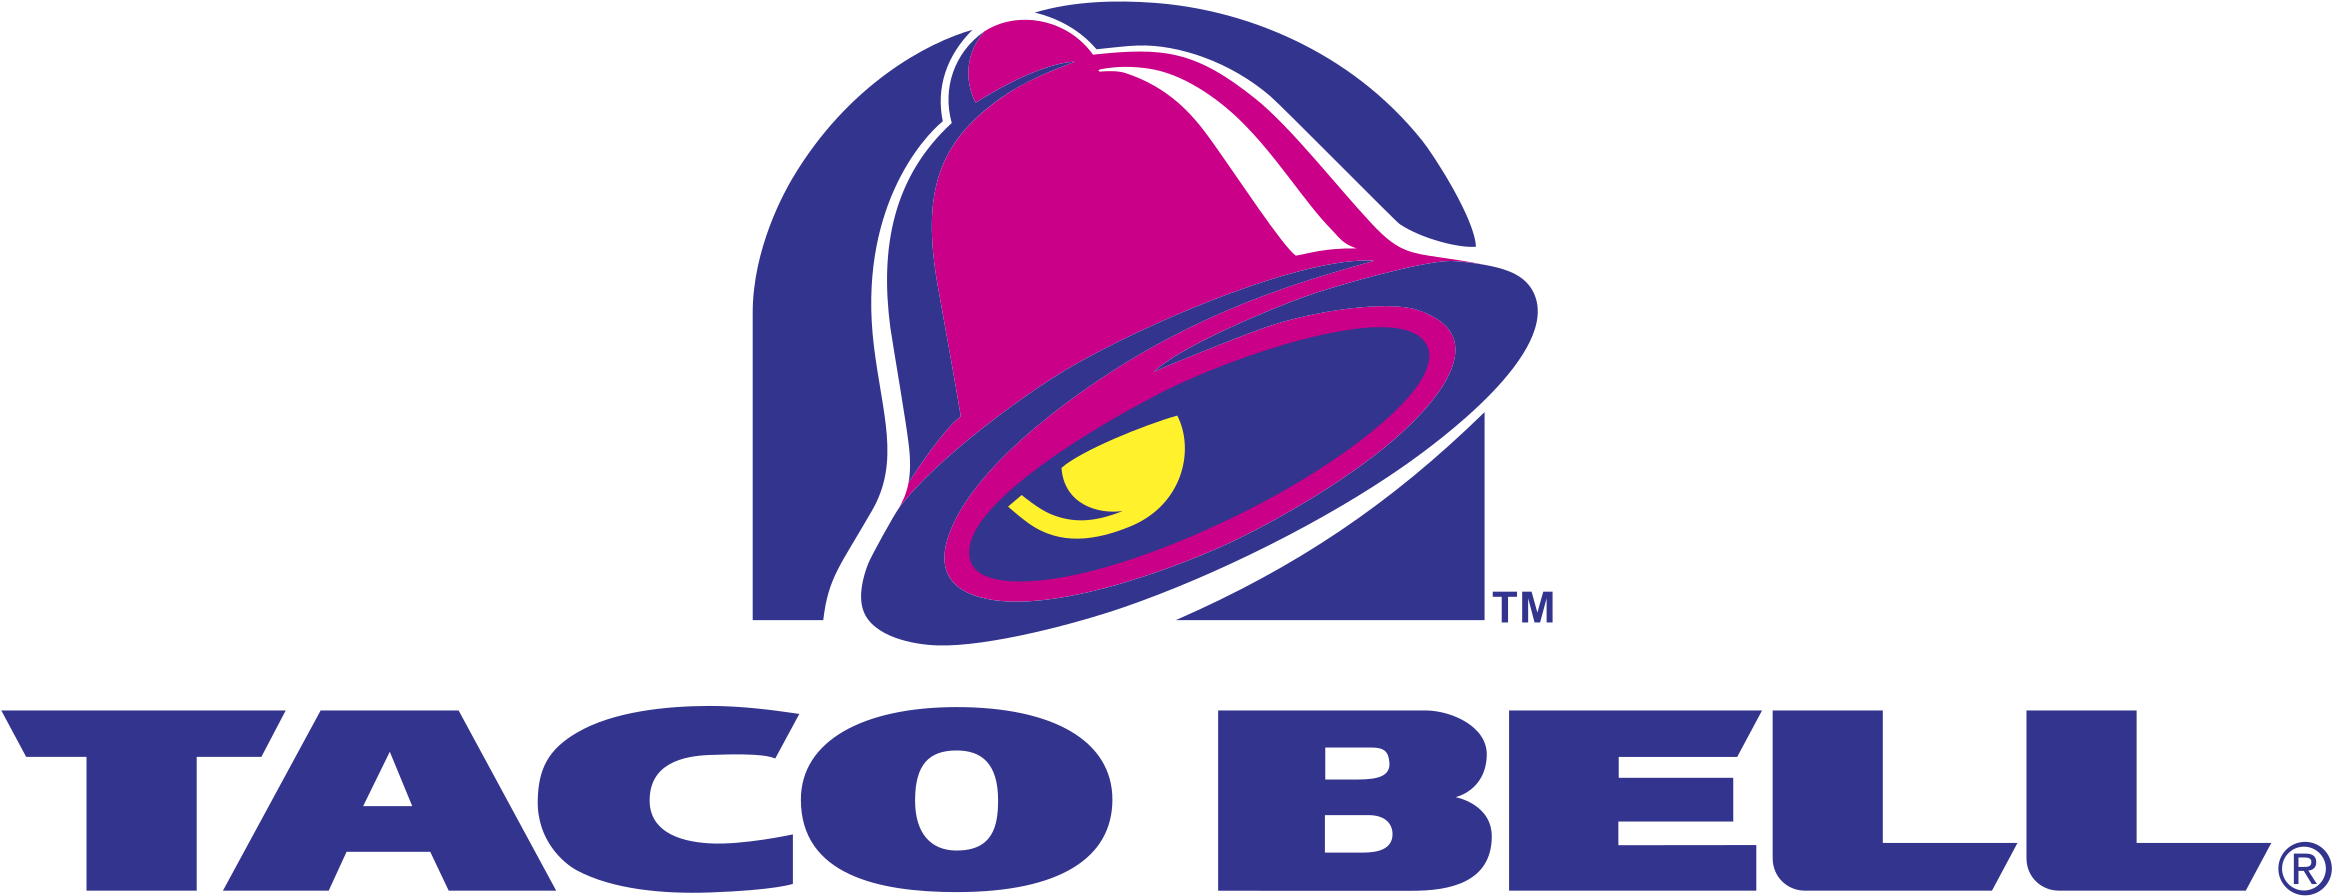 Download PNG image - Taco Bell Logo PNG 